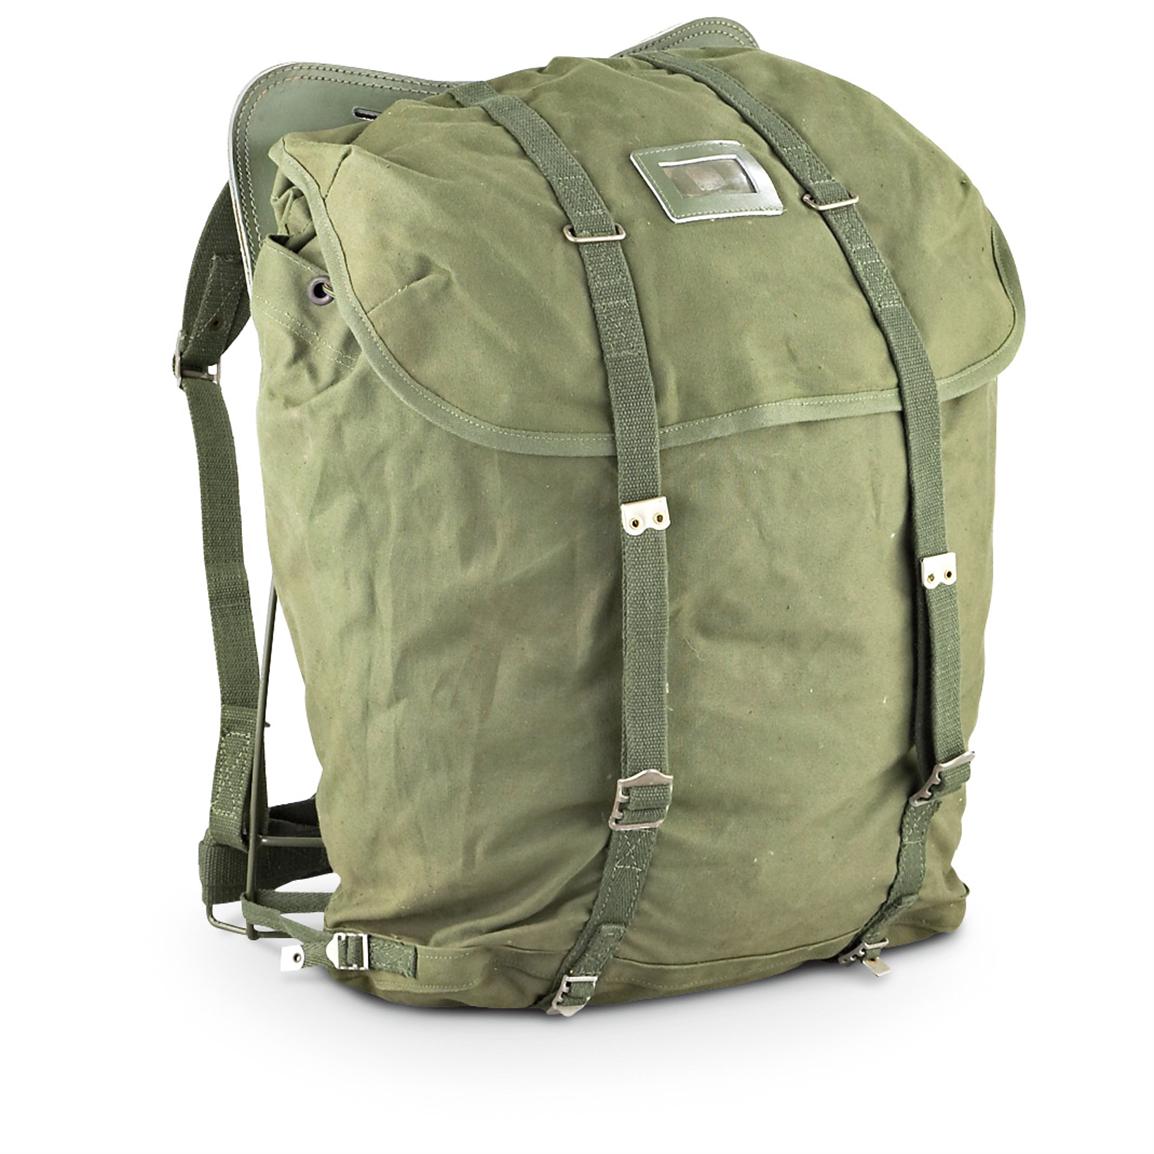 Used Swedish Military 50L Backpack, Olive Drab - 196768, Tactical ...